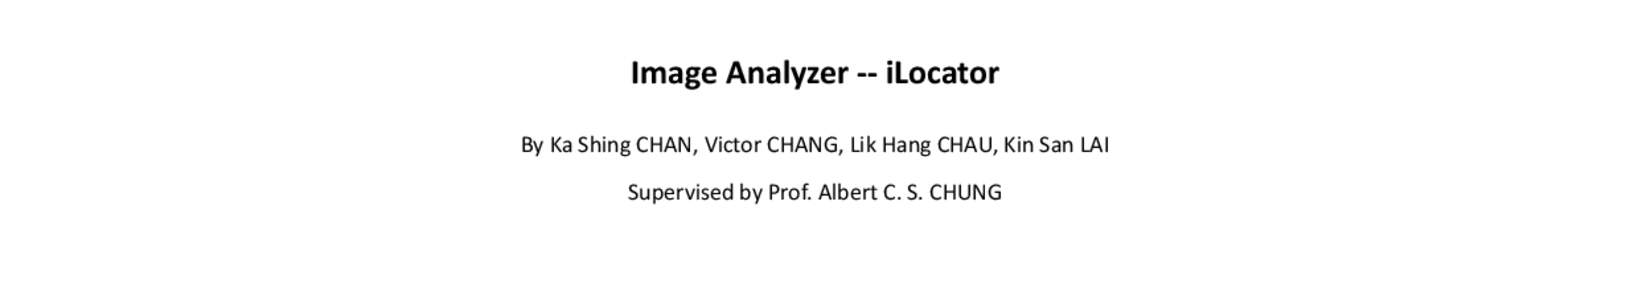 Image Analyzer -- iLocator By Ka Shing CHAN, Victor CHANG, Lik Hang CHAU, Kin San LAI Supervised by Prof. Albert C. S. CHUNG Introduction Inspired by very limited location recognition power of Google Goggles, we develop